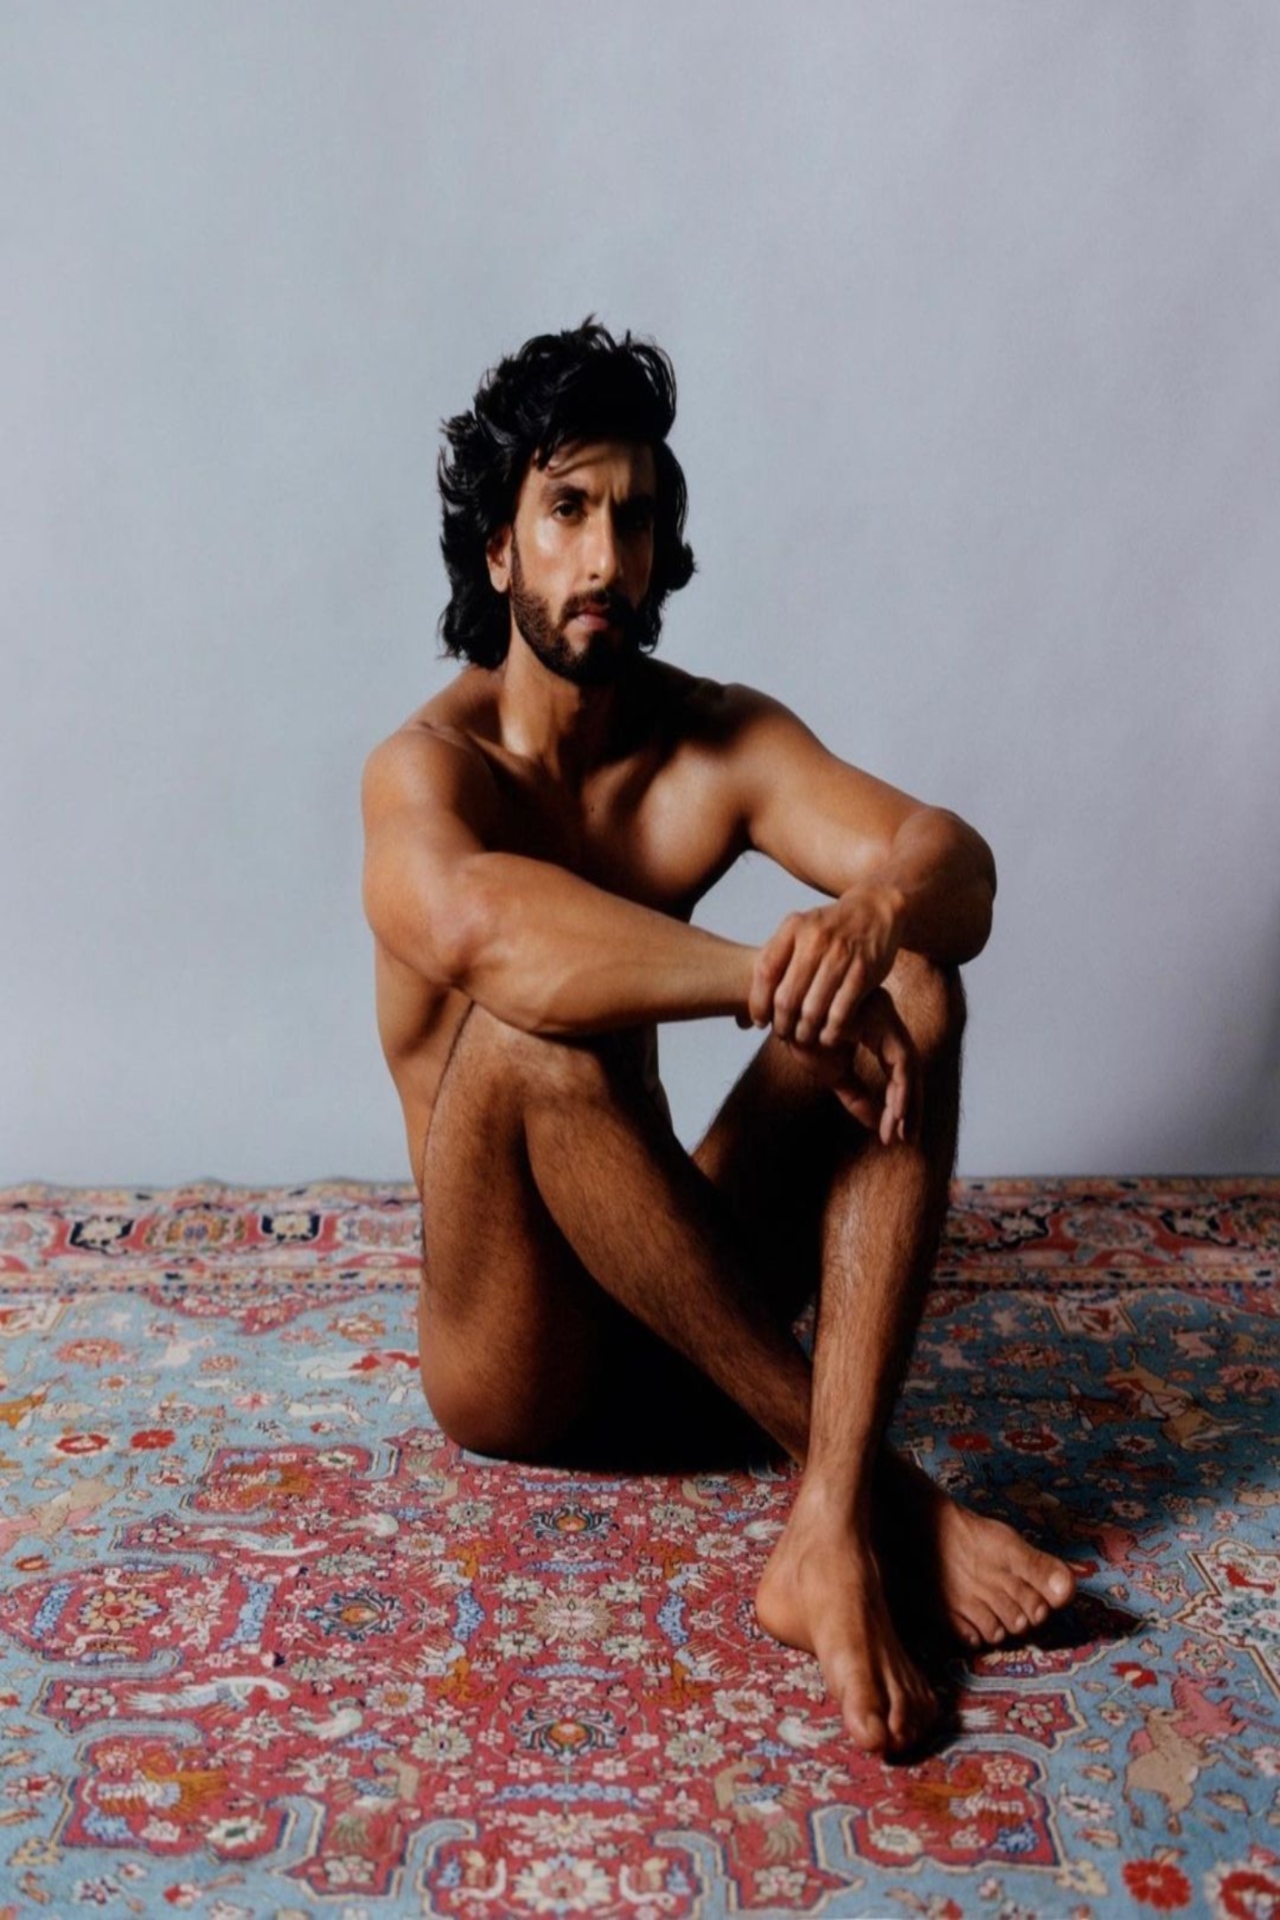 An FIR was lodged against Ranveer Singh following a recent nude photoshoot he did for a magazine.